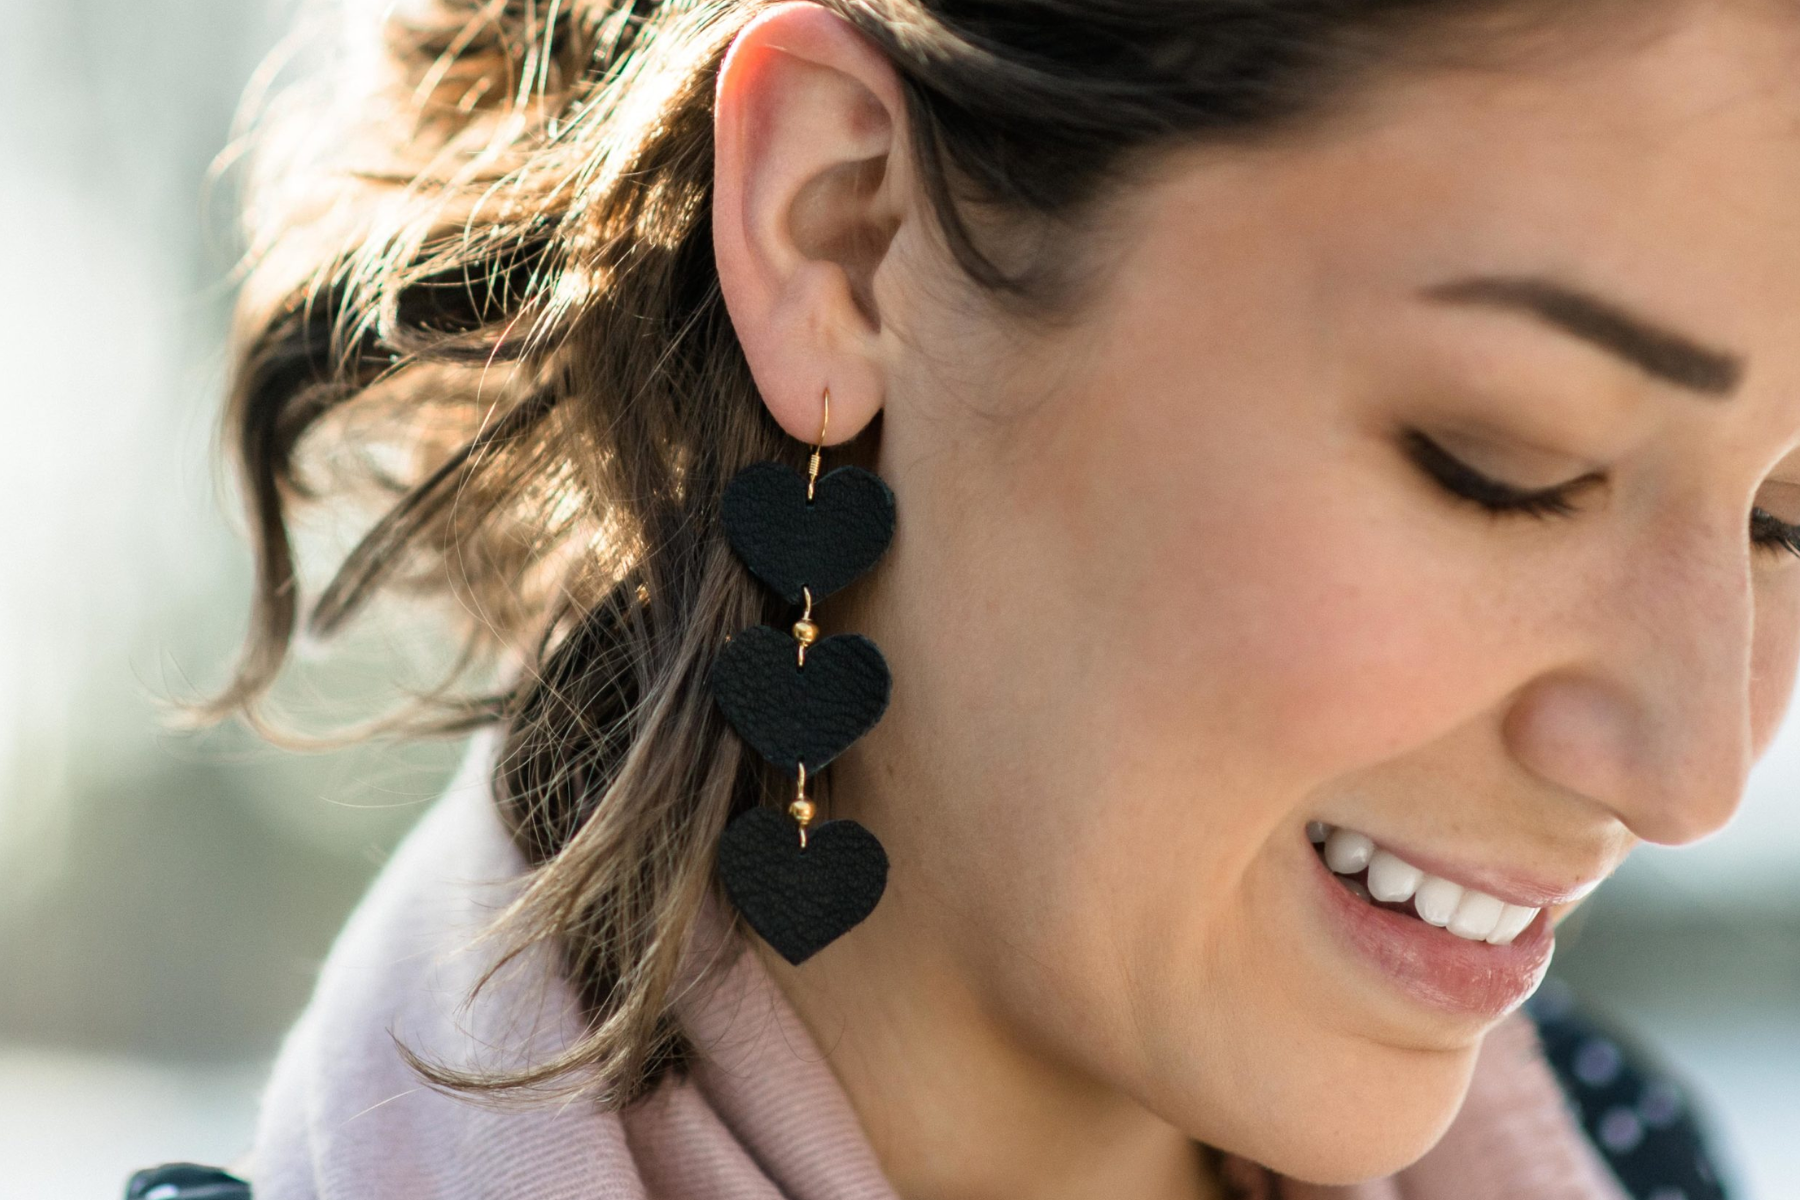 A woman in public wearing three-layered heart leather earrings